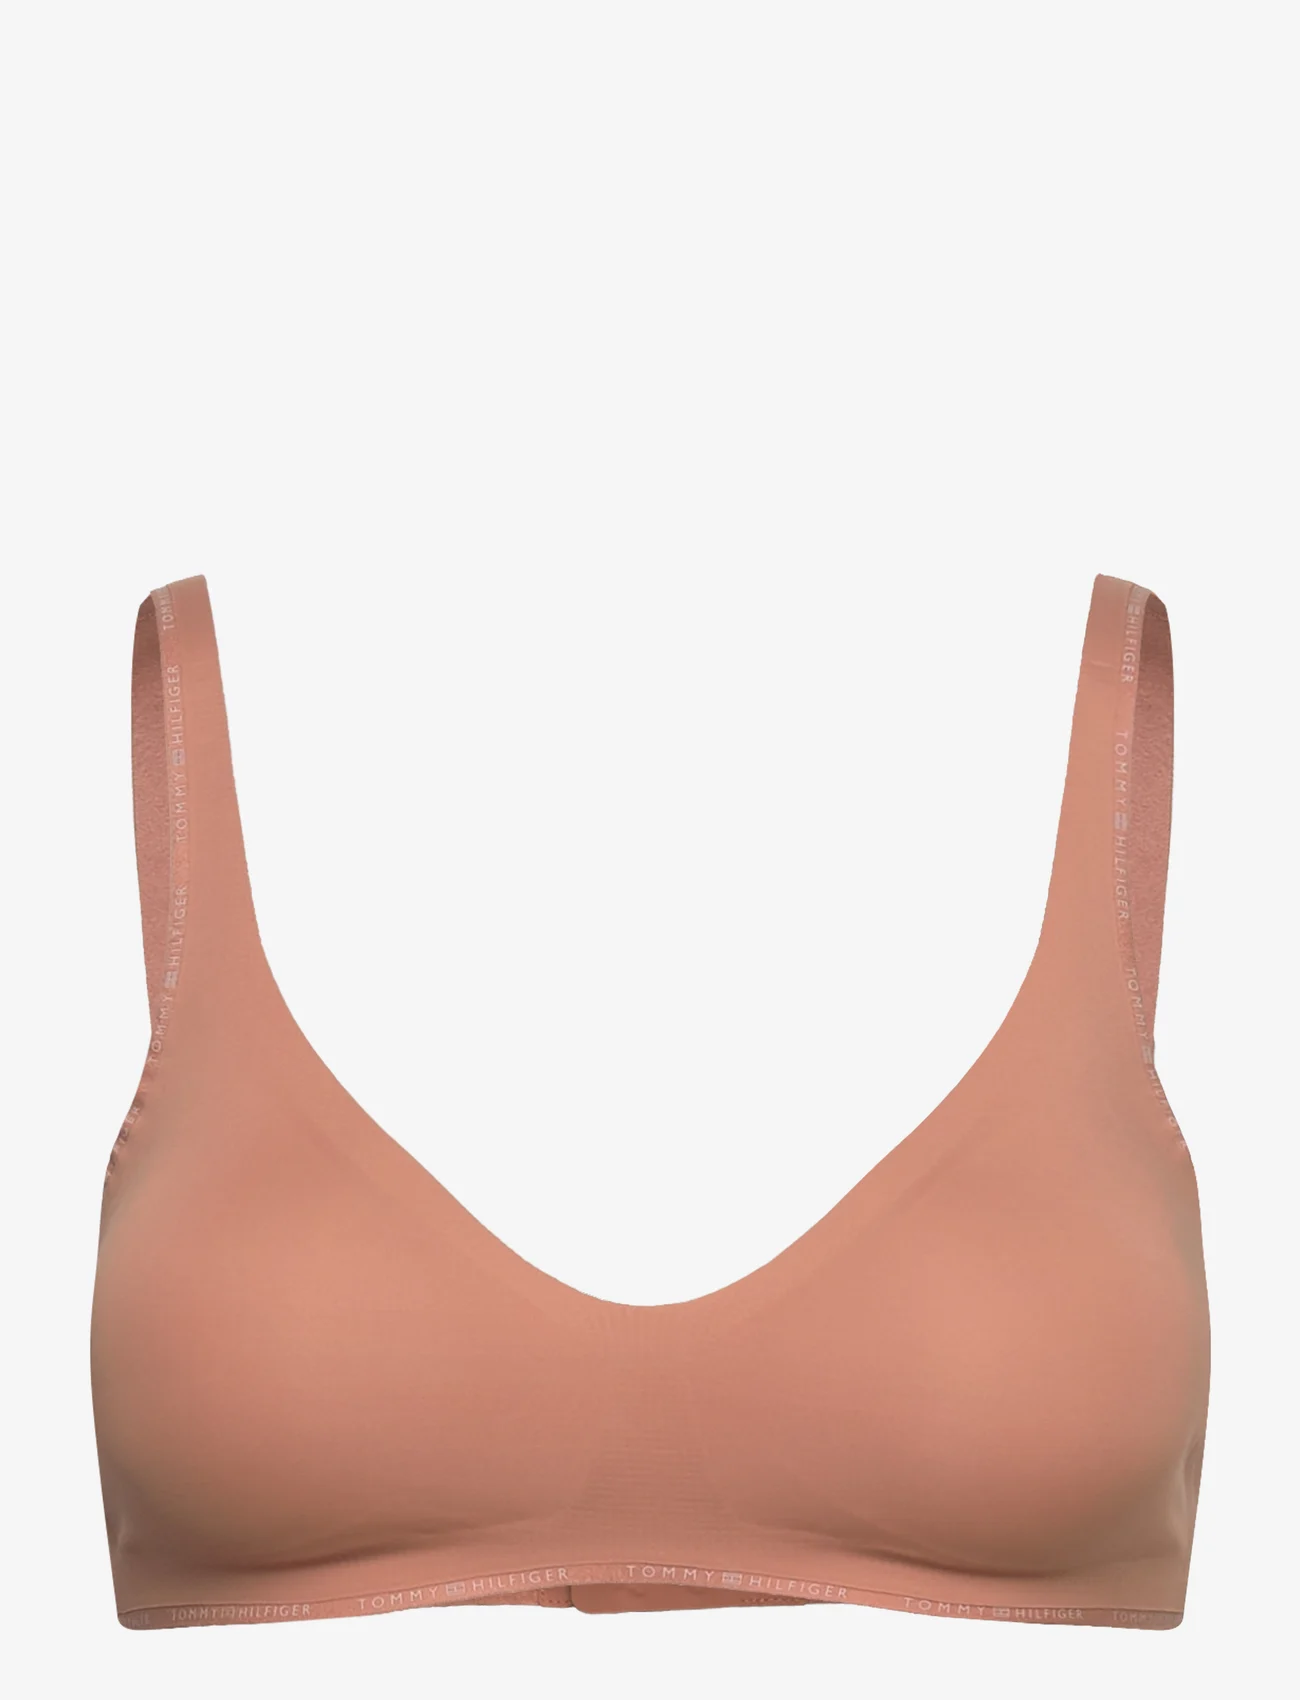 Tommy Hilfiger - LL TRIANGLE - non wired bras - light ginger - 0